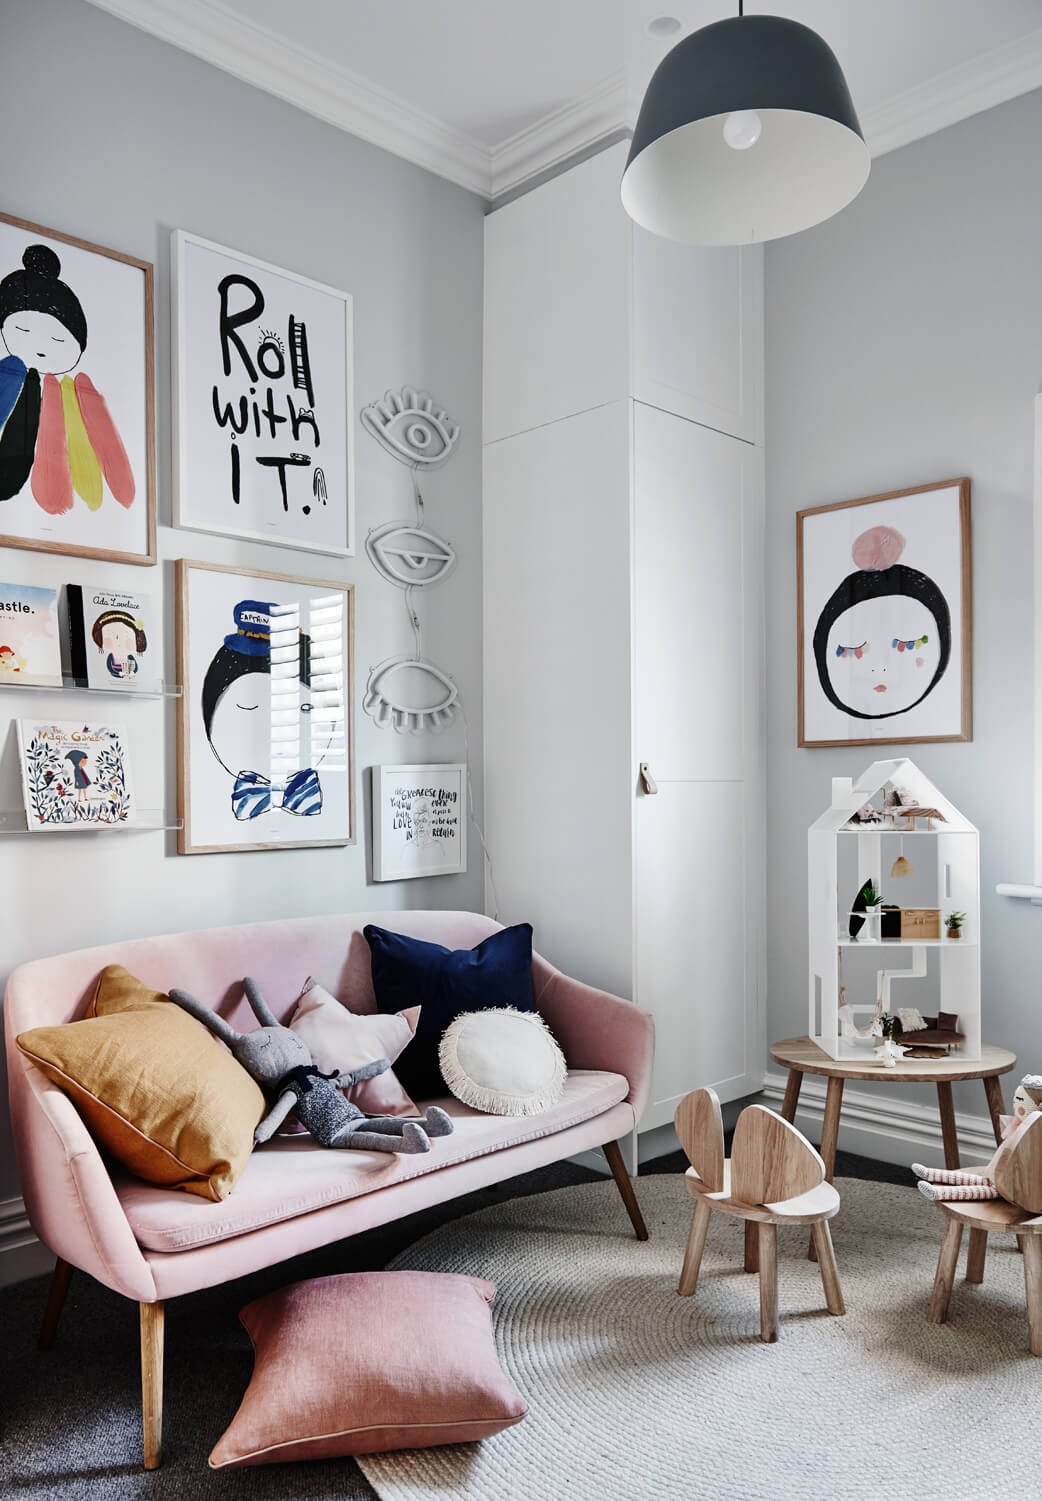 Paul & Paula: Two contemporary children's rooms with flair